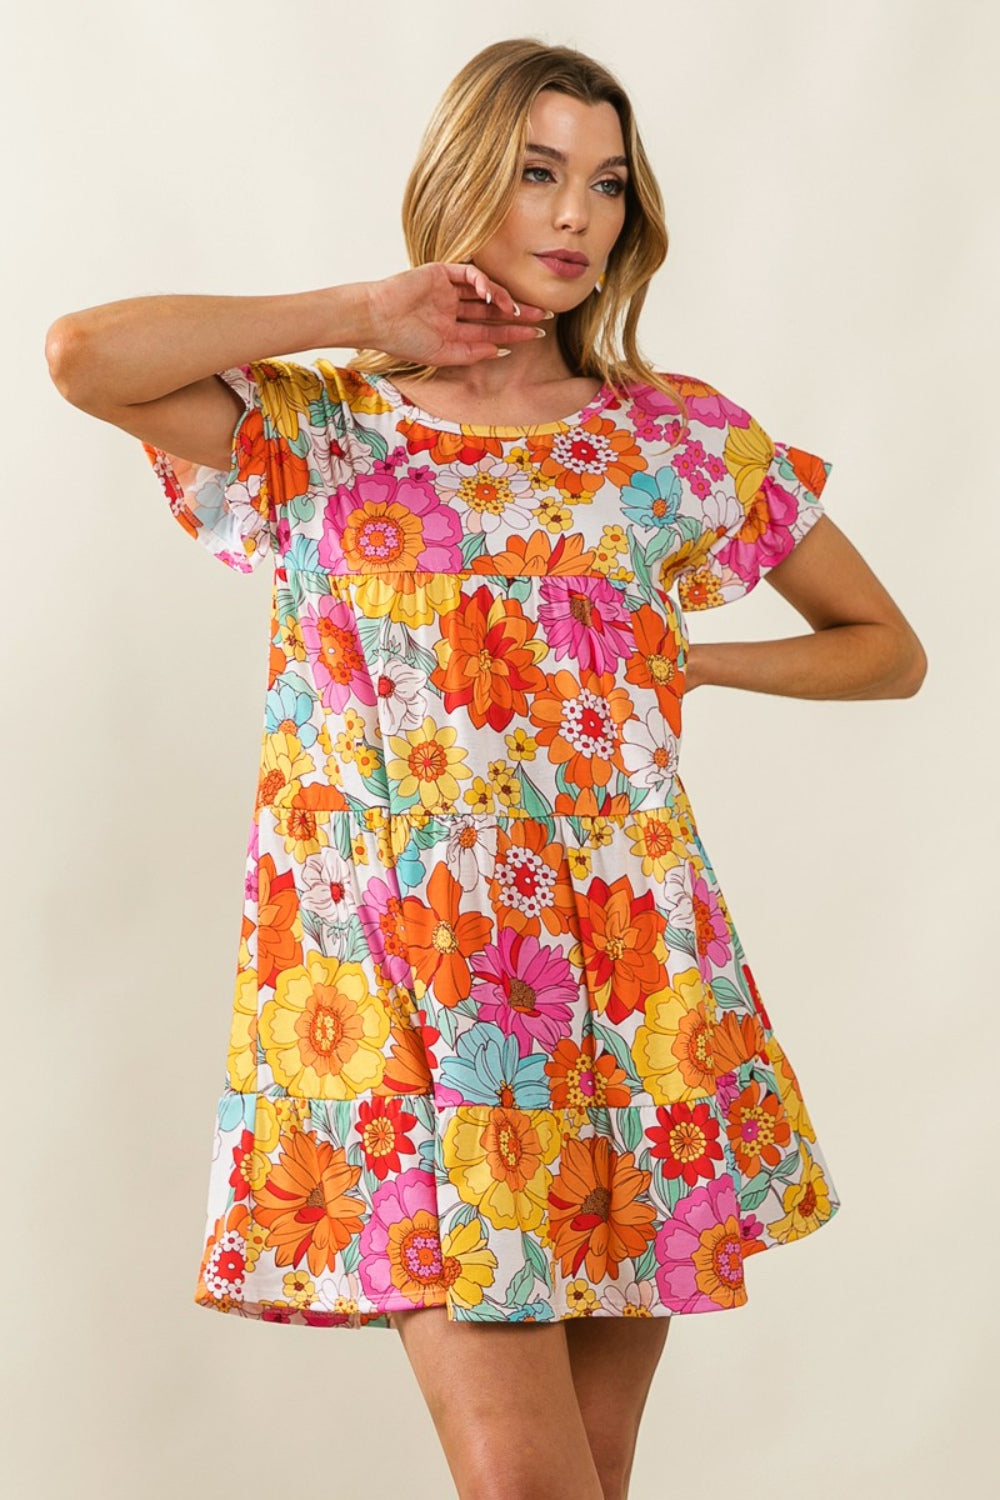 Blue Zone Planet |  BiBi Floral Short Sleeve Tiered Dress BLUE ZONE PLANET